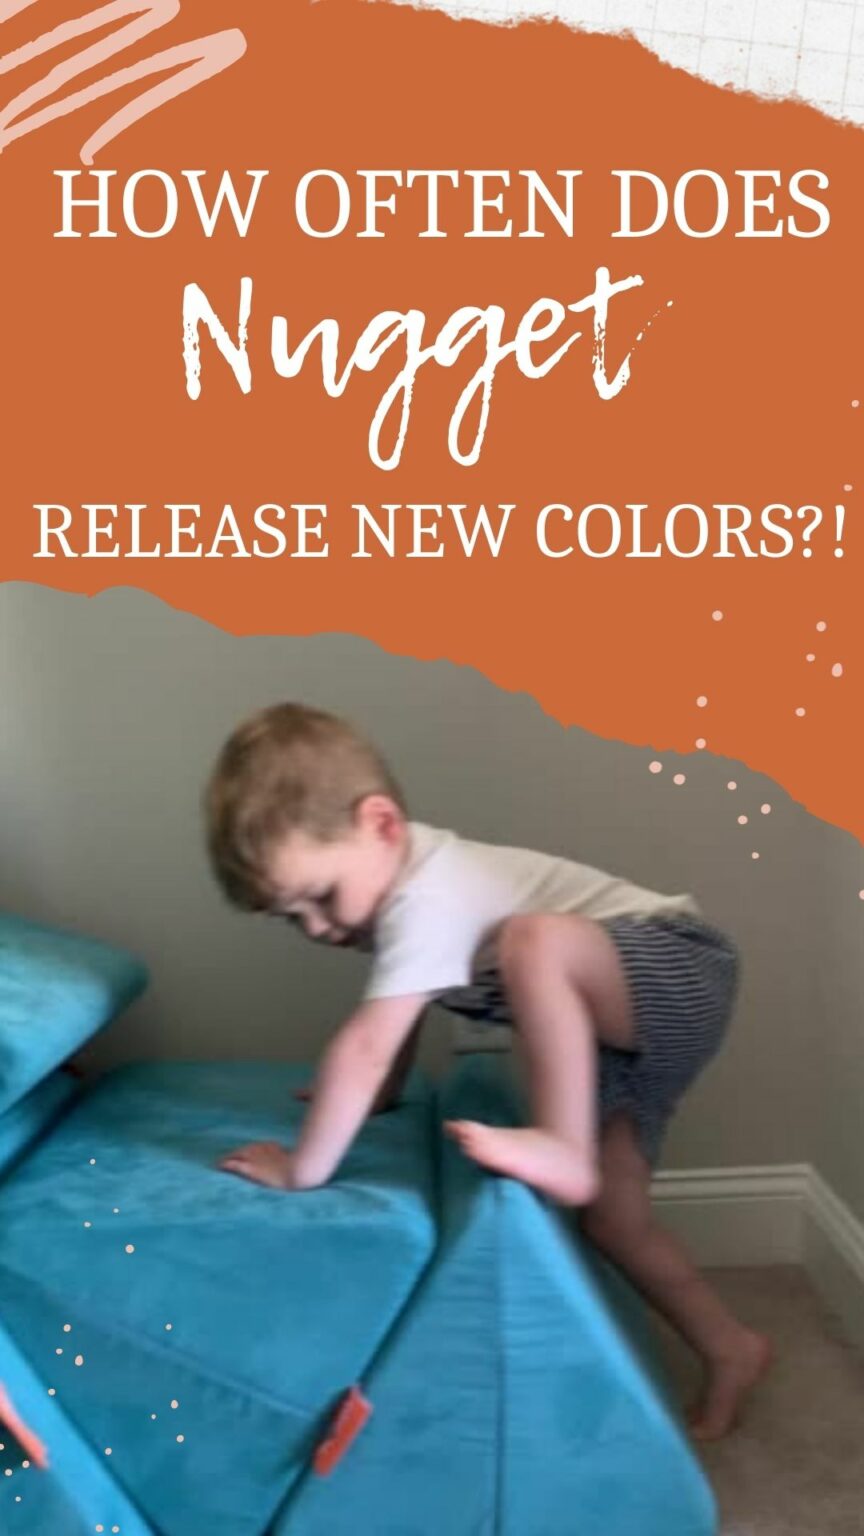 When are new Nugget colors released? Celebrating with kids